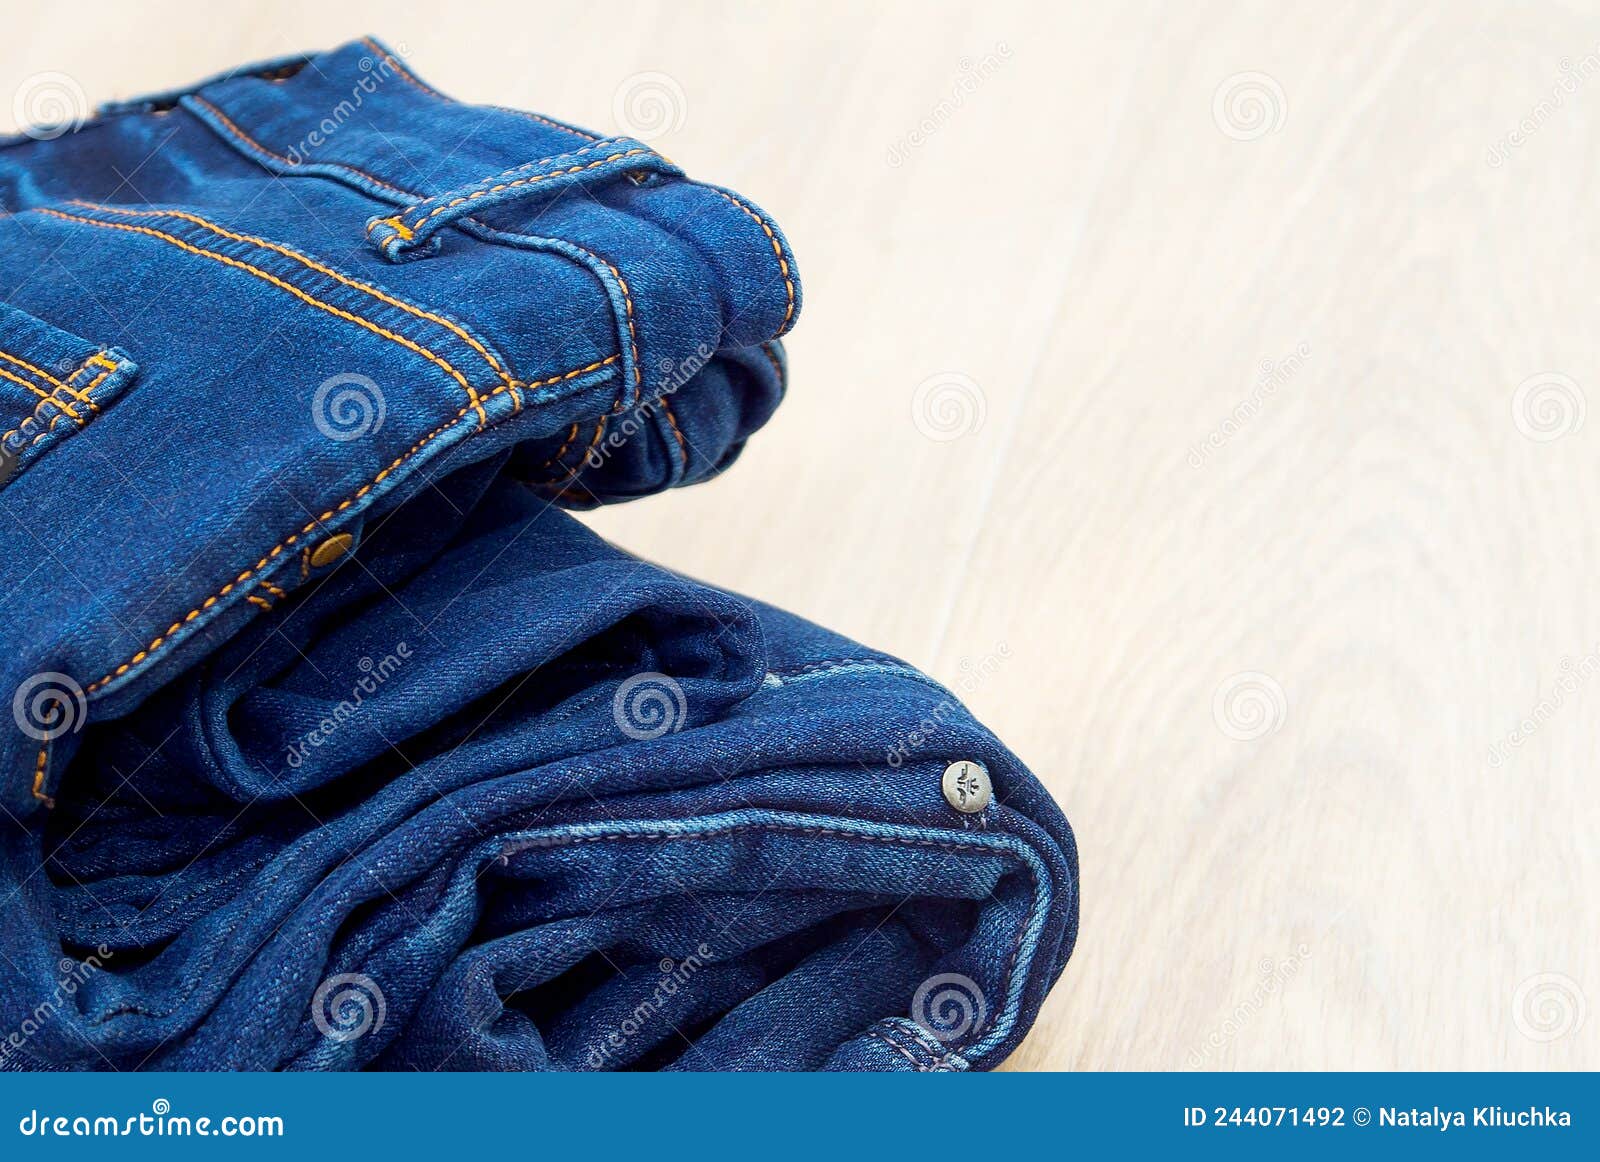 Blue Jeans on a White Background. Lots of Jeans. Denim Close-up ...